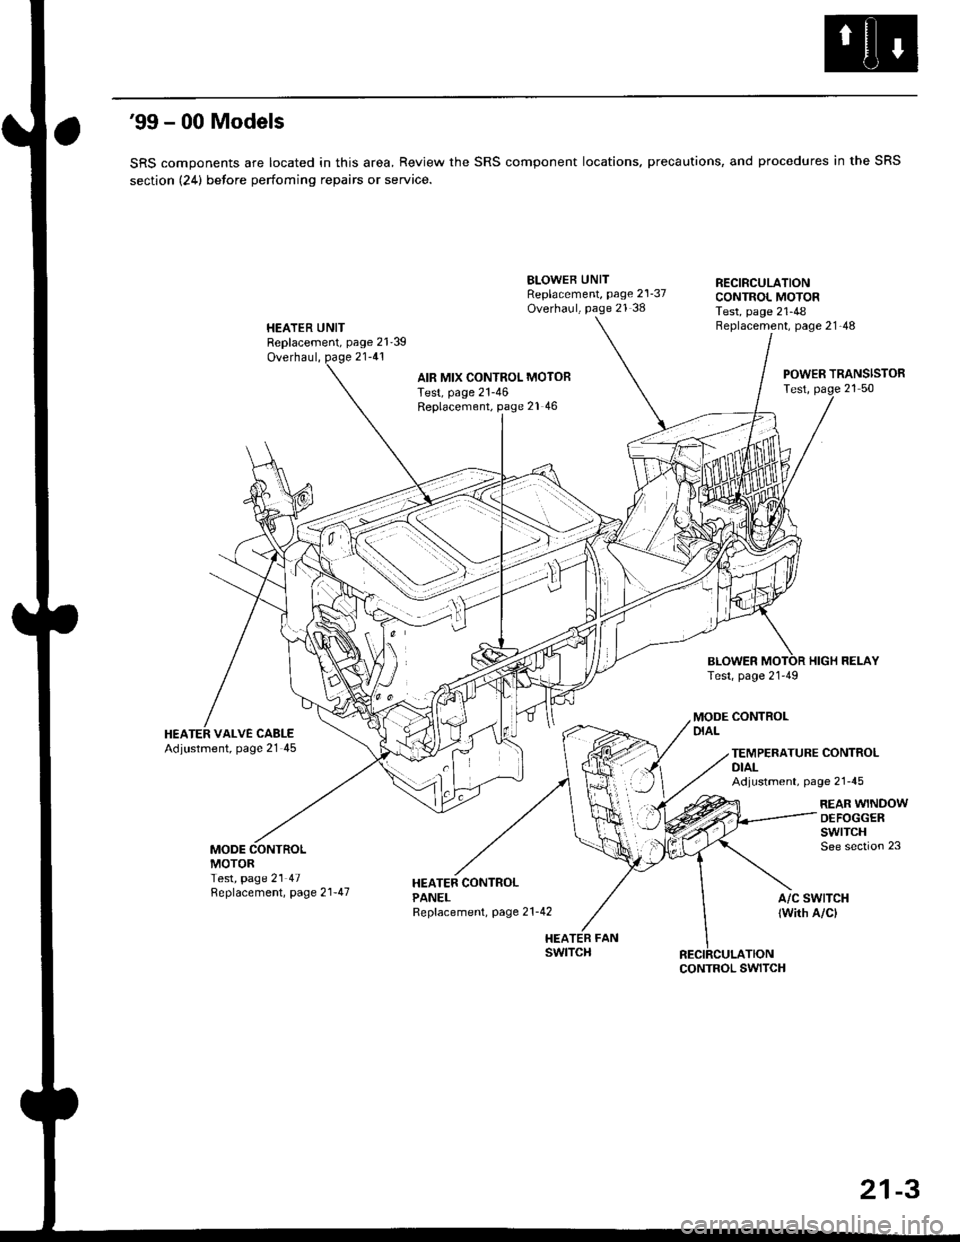 HONDA CIVIC 2000 6.G Workshop Manual 99 - 00 Models
SRS components are located in this area, Review the SRS component locations, precautions, and procedures in the SRS
section (24) betore perfoming repairs or service.
HEATER UNITReplace